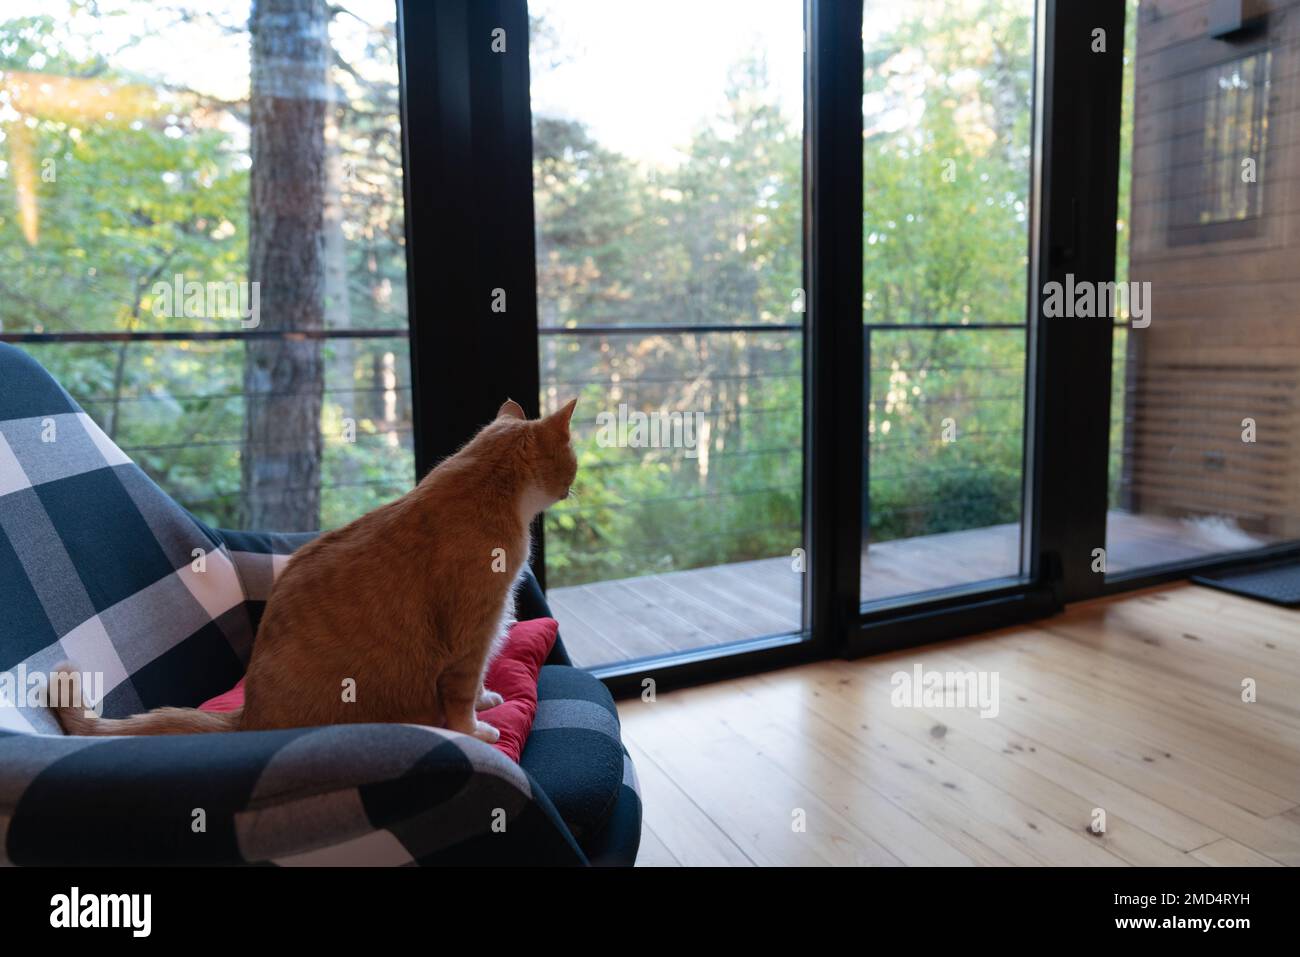 The red cat sits on a chair and looks out the window at the green forest. Stock Photo